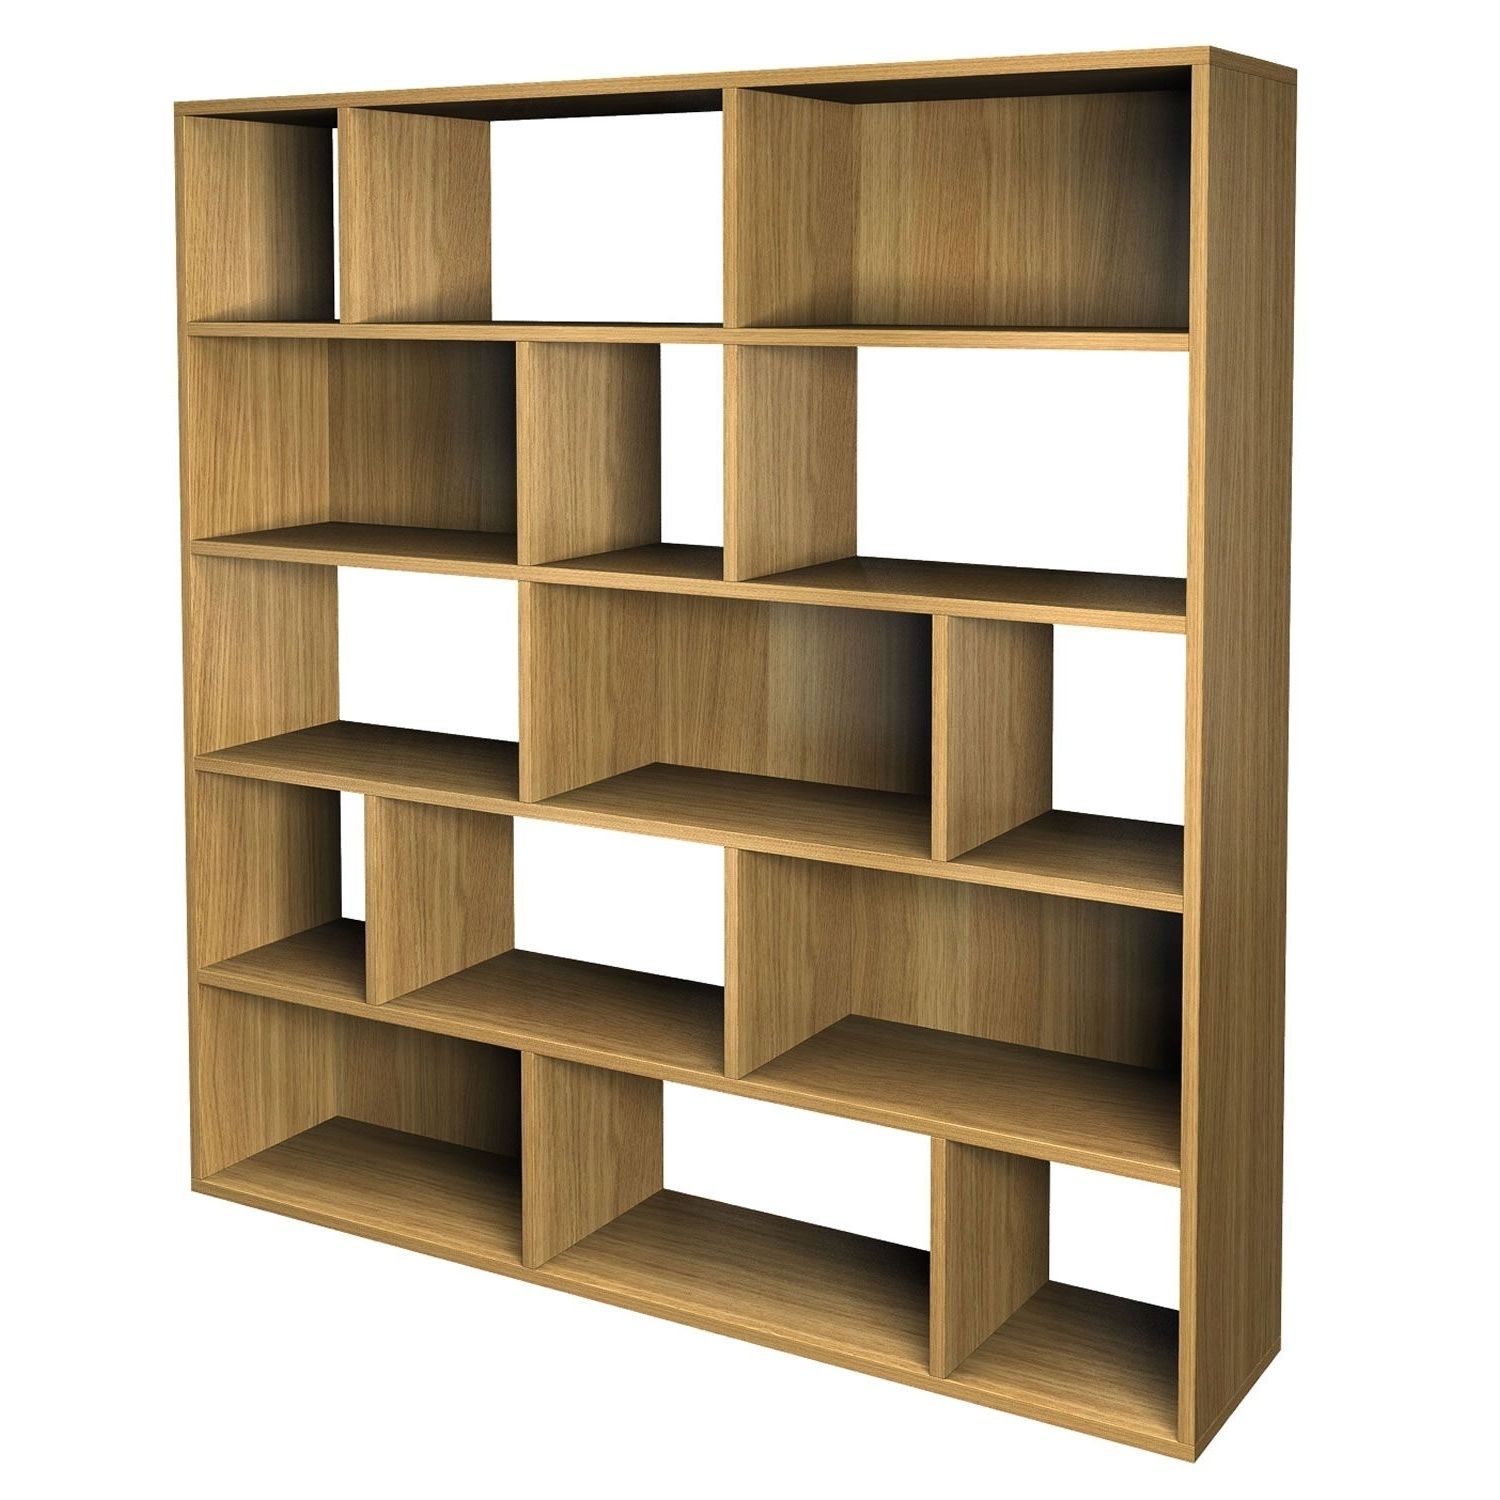 Recent Contemporary Oak Bookcases Regarding Furniture, Simple Stylish Designs Pictures Of Creative Bookshelf (View 3 of 15)